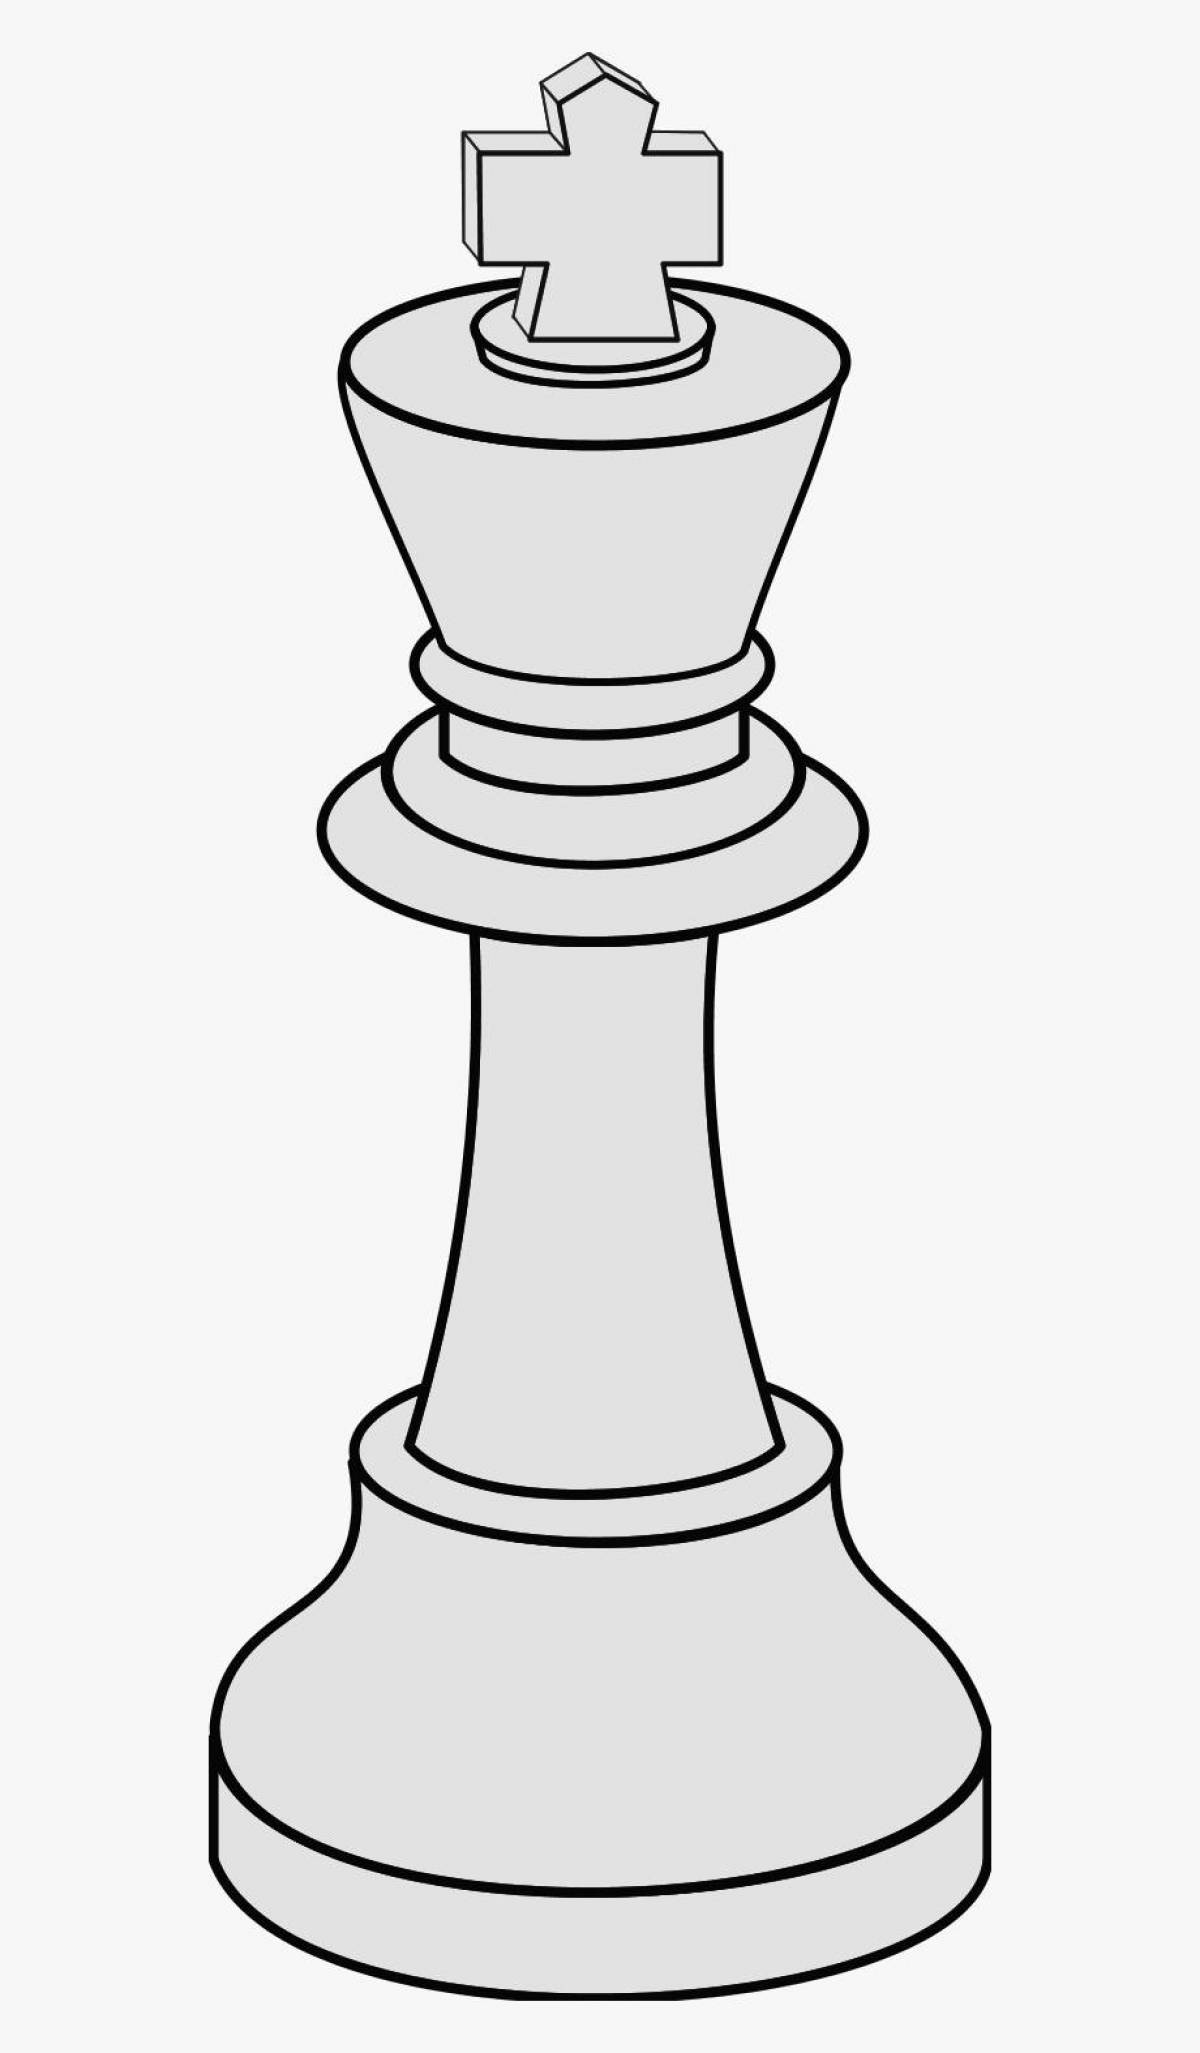 Playful chess coloring page